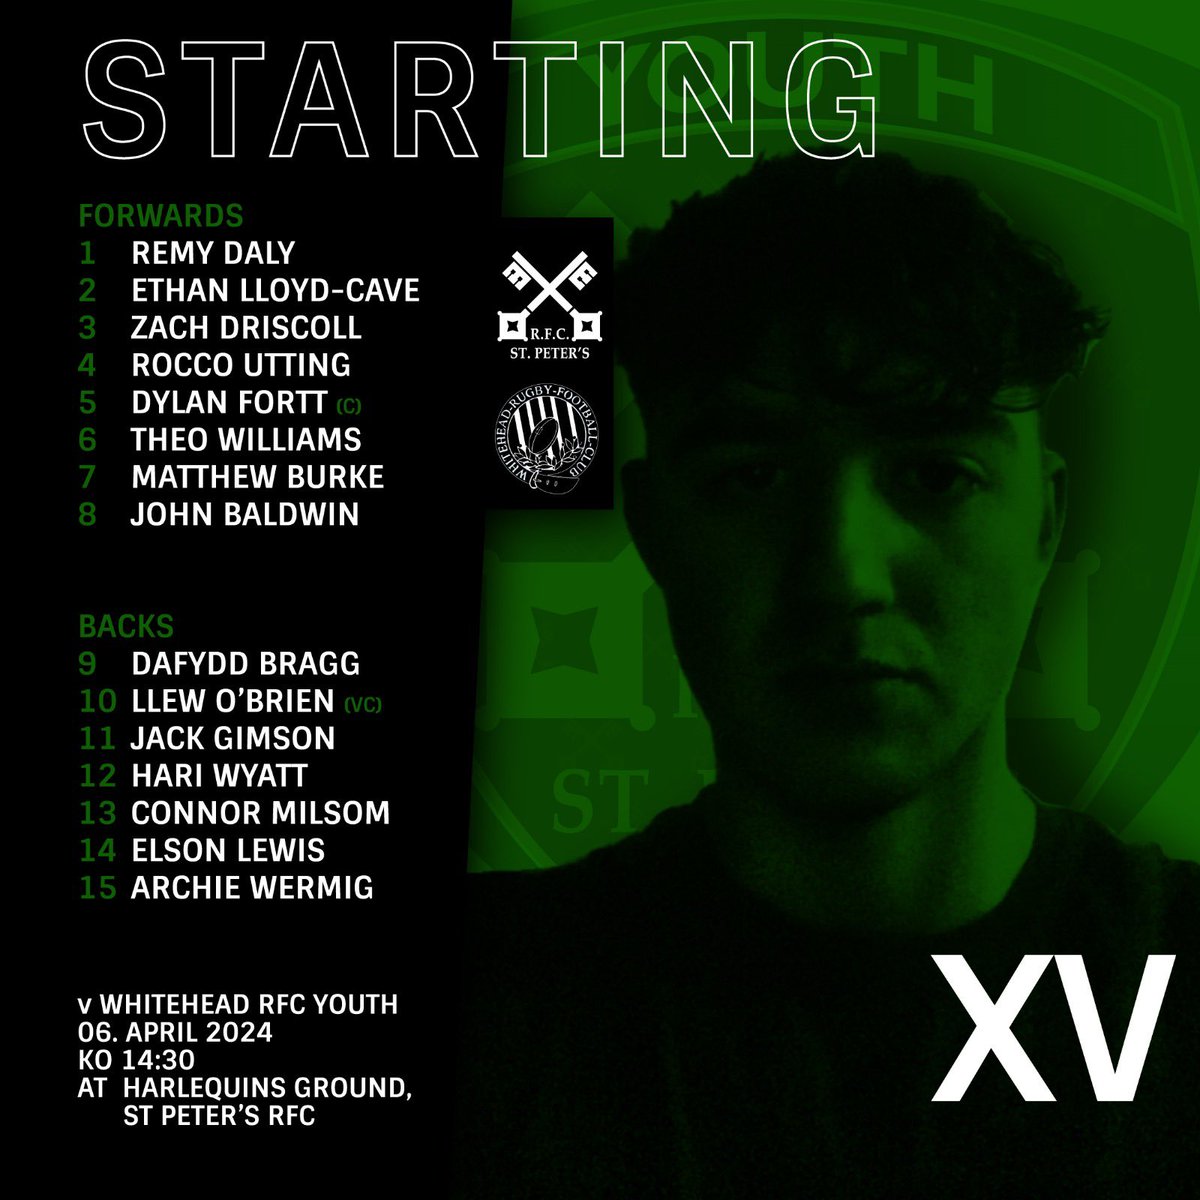 Starting XV for tomorrow’s development game: 🏉 @WhiteheadsRFC Youth 📆 06/04/2024 ⏰ 14:30 🏟️ @stpetersrfc 🏆 Youth Development Game #grassroots #rugby #cardiff #wales